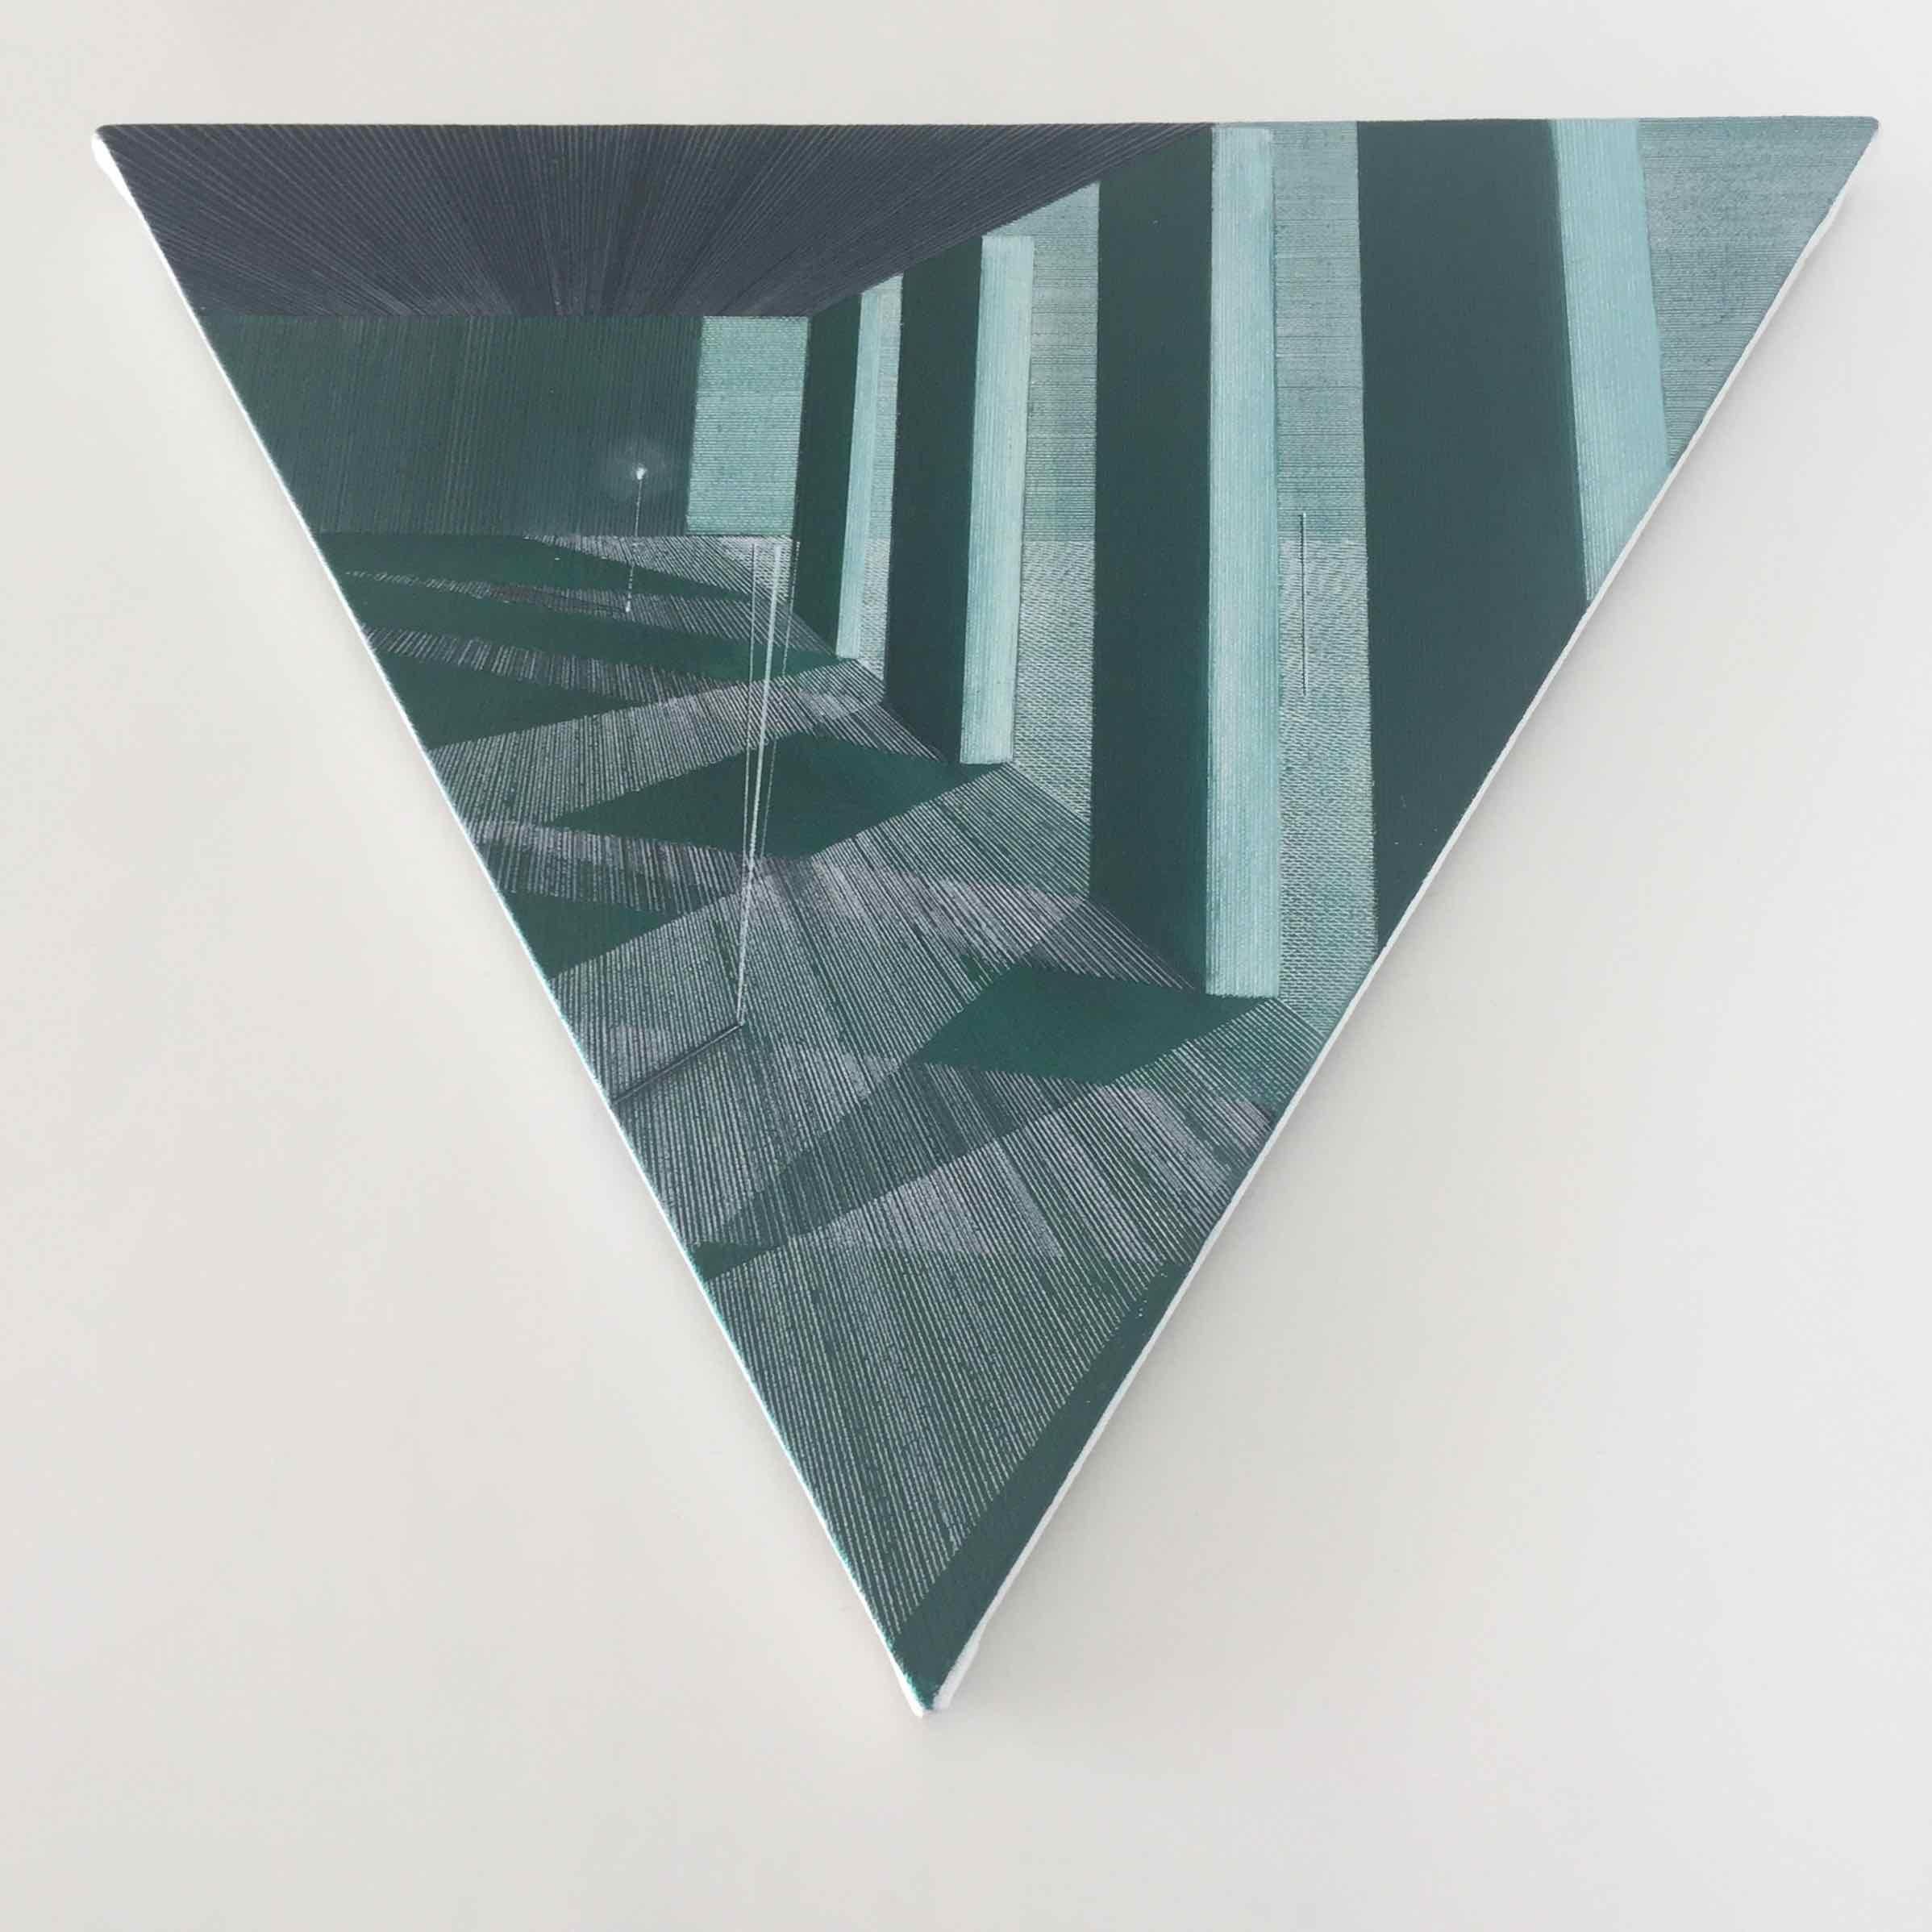 Hypnotise to Darkness by Joella Wheatley, 2016, Oil, acrylic and pen on canvas, stretched over board

This triangular-shaped drawing/painting sits flat on the wall and the viewer is invited to move in close to examine the fine perspective line